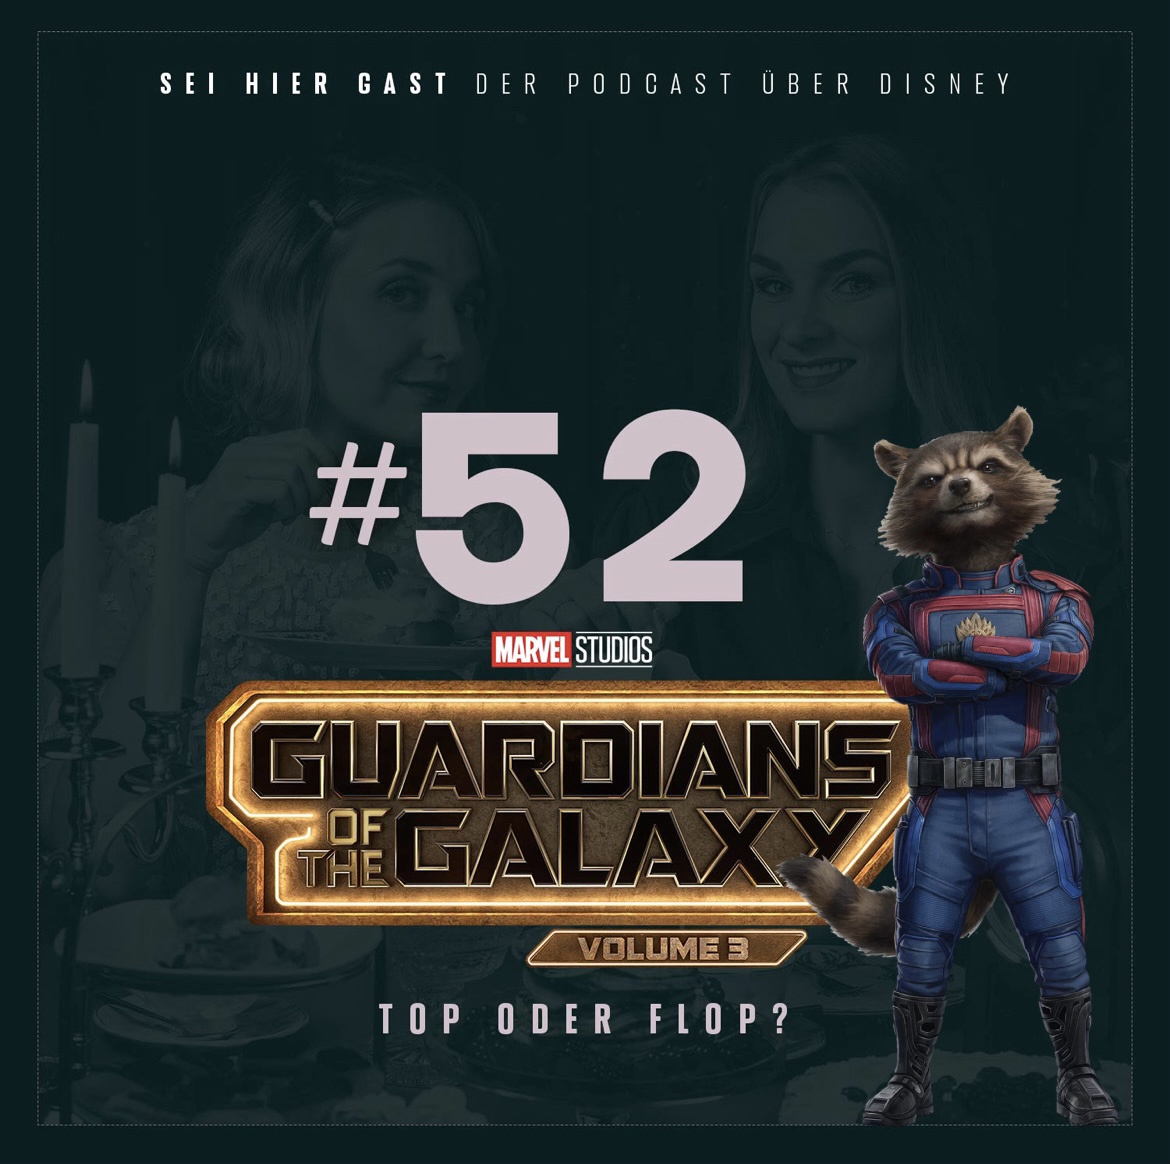 #52 Guardians of the Galaxy Volume 3 I Top oder Flop?